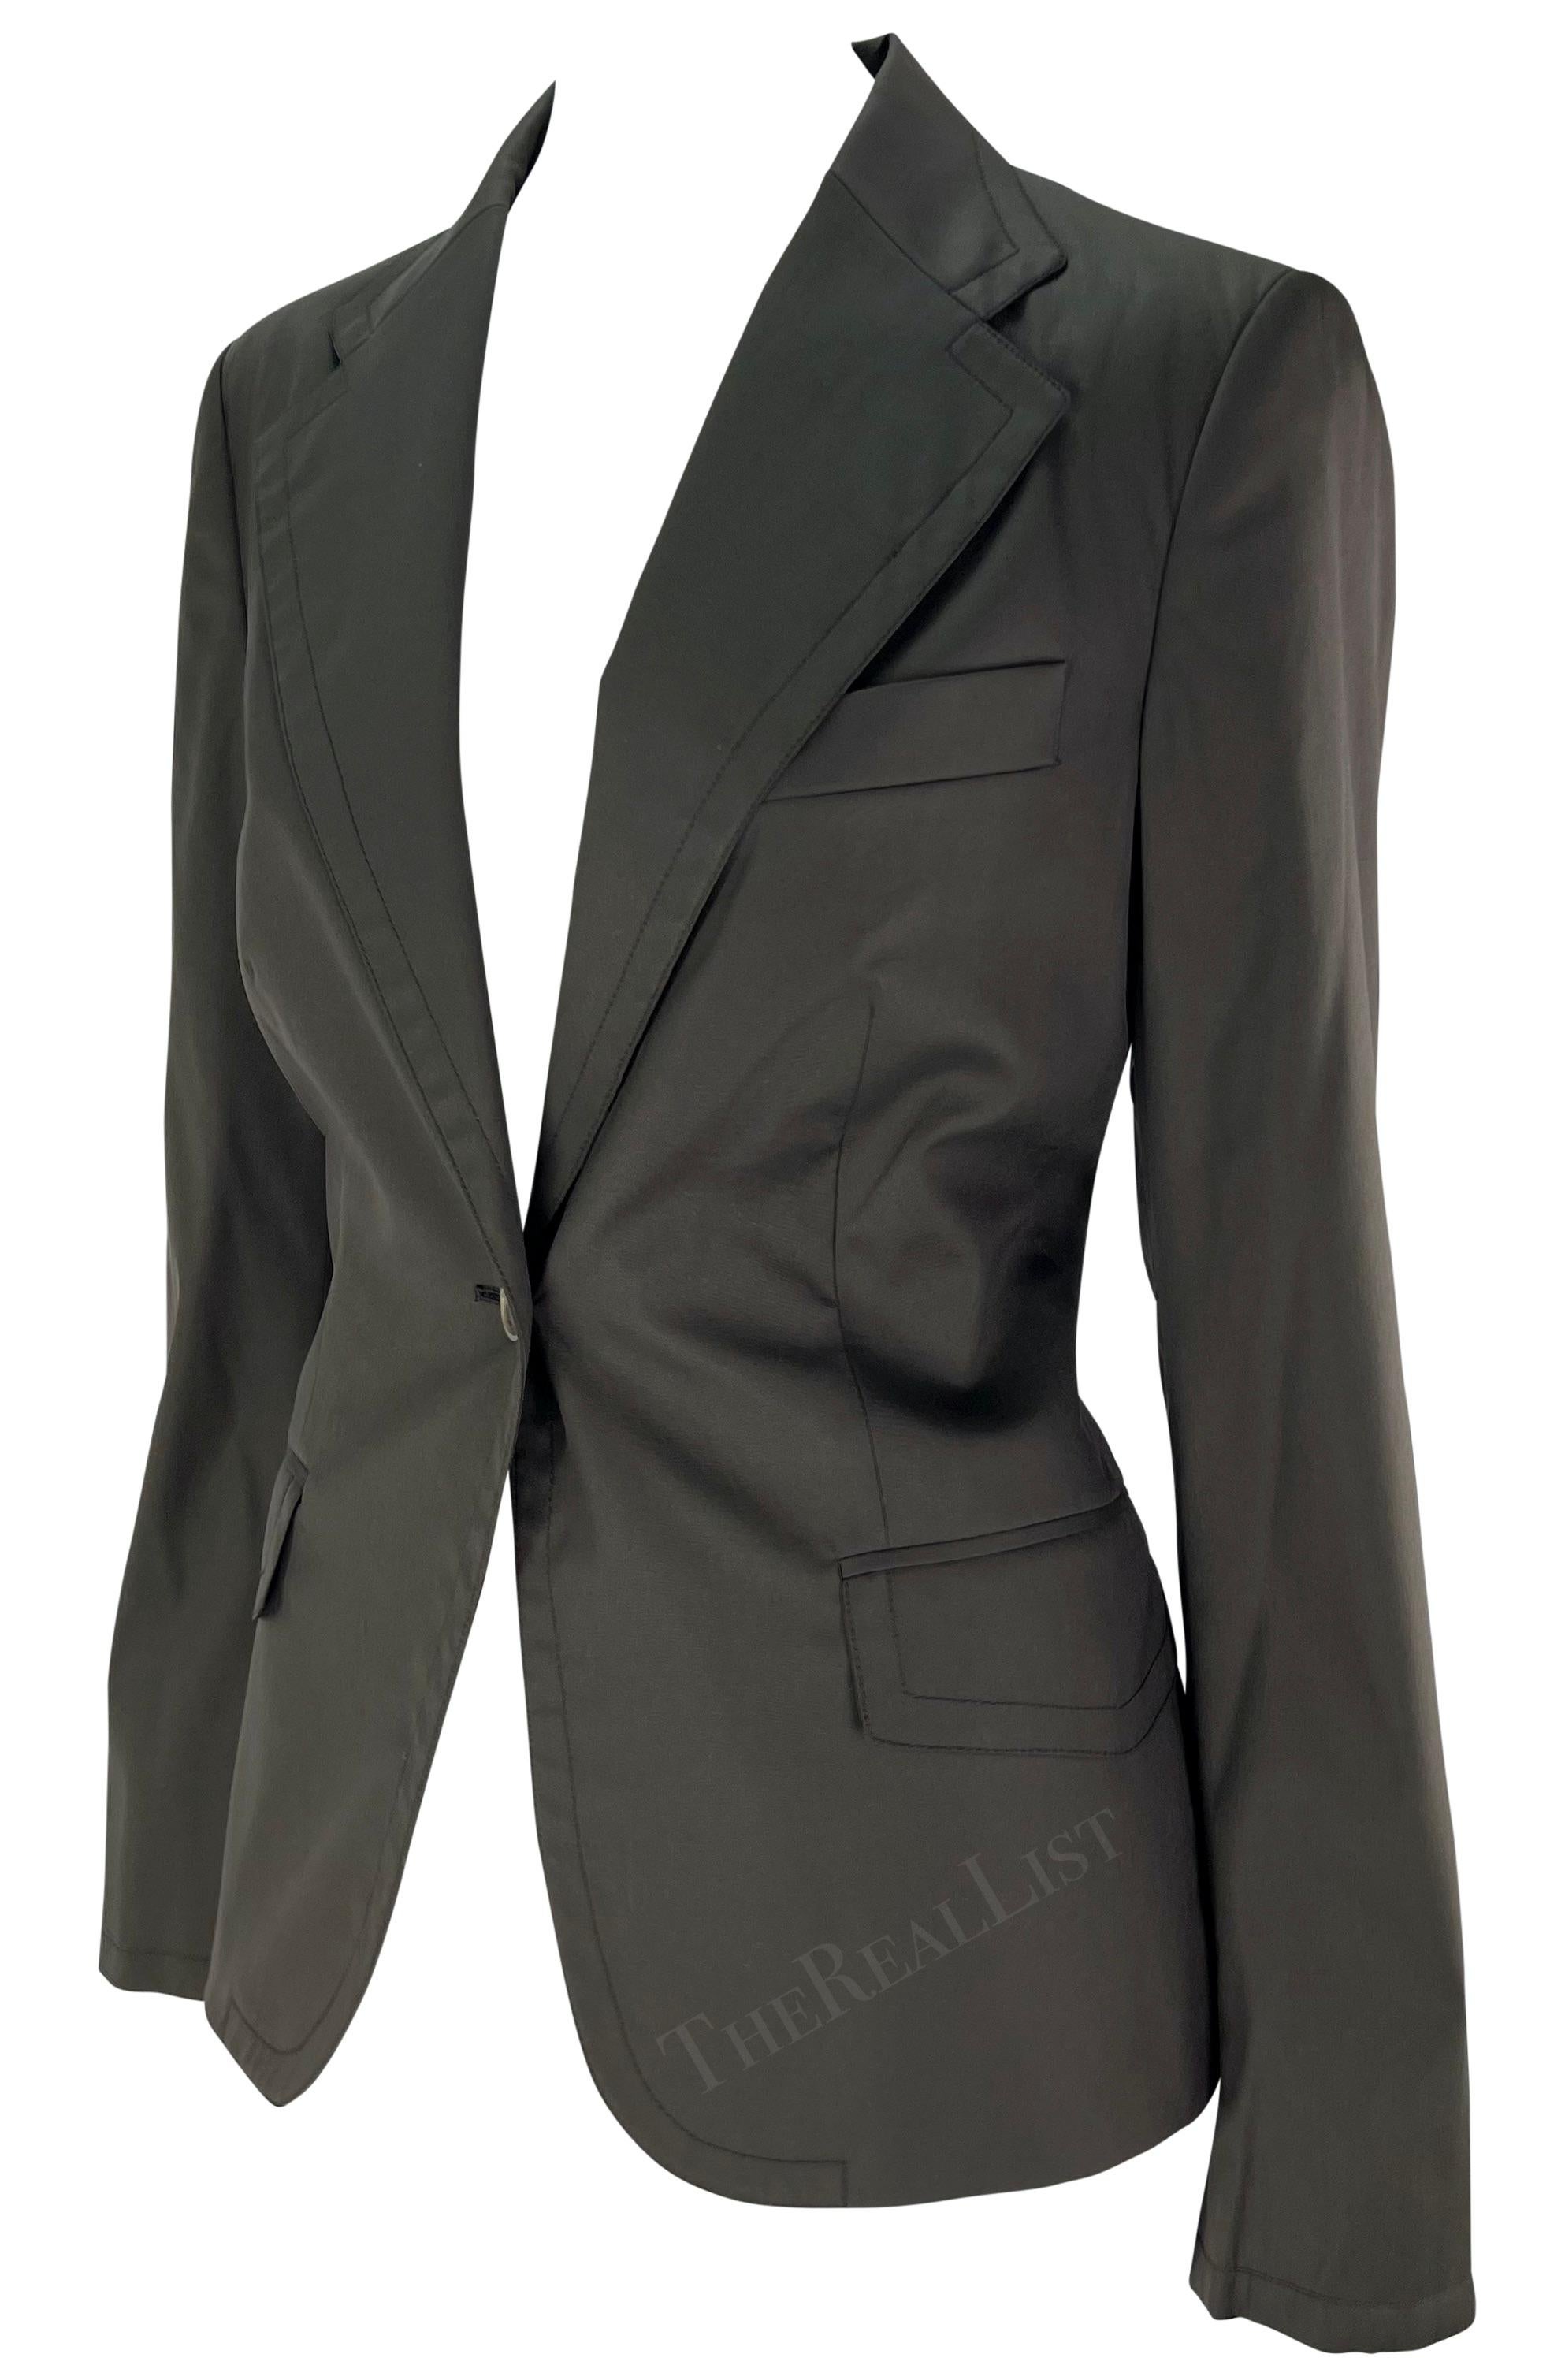 Presenting a beautiful dark green Gucci blazer, designed by Tom Ford. From the Fall/Winter 2003 collection, this fabulous jacket features a single button closure at the front and is the perfect chic addition to any wardrobe! 

Approximate